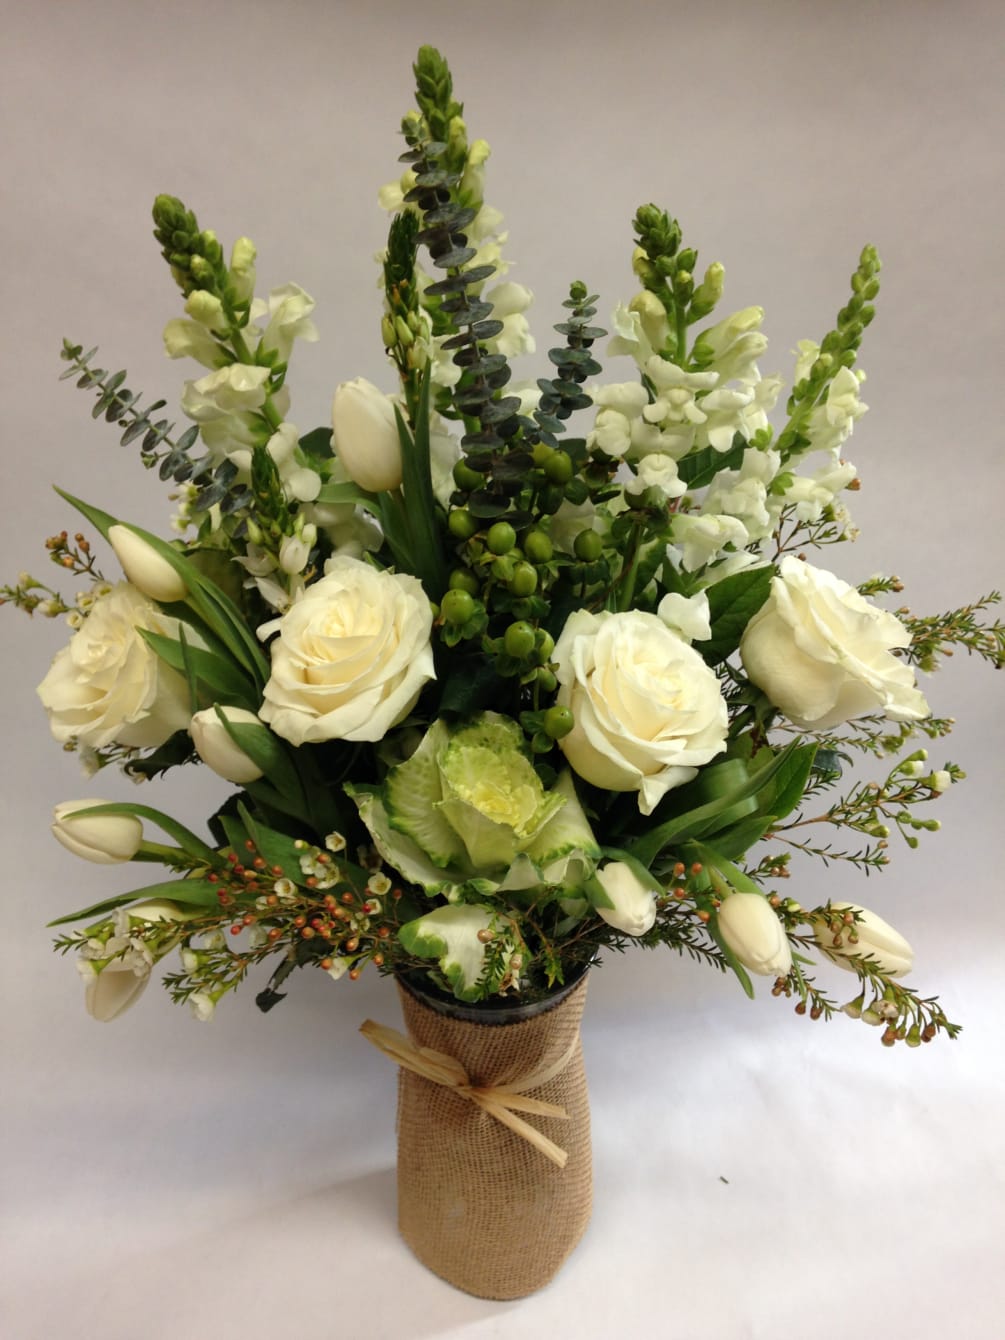 This elegant assembly of green and white flowers comes complete with white